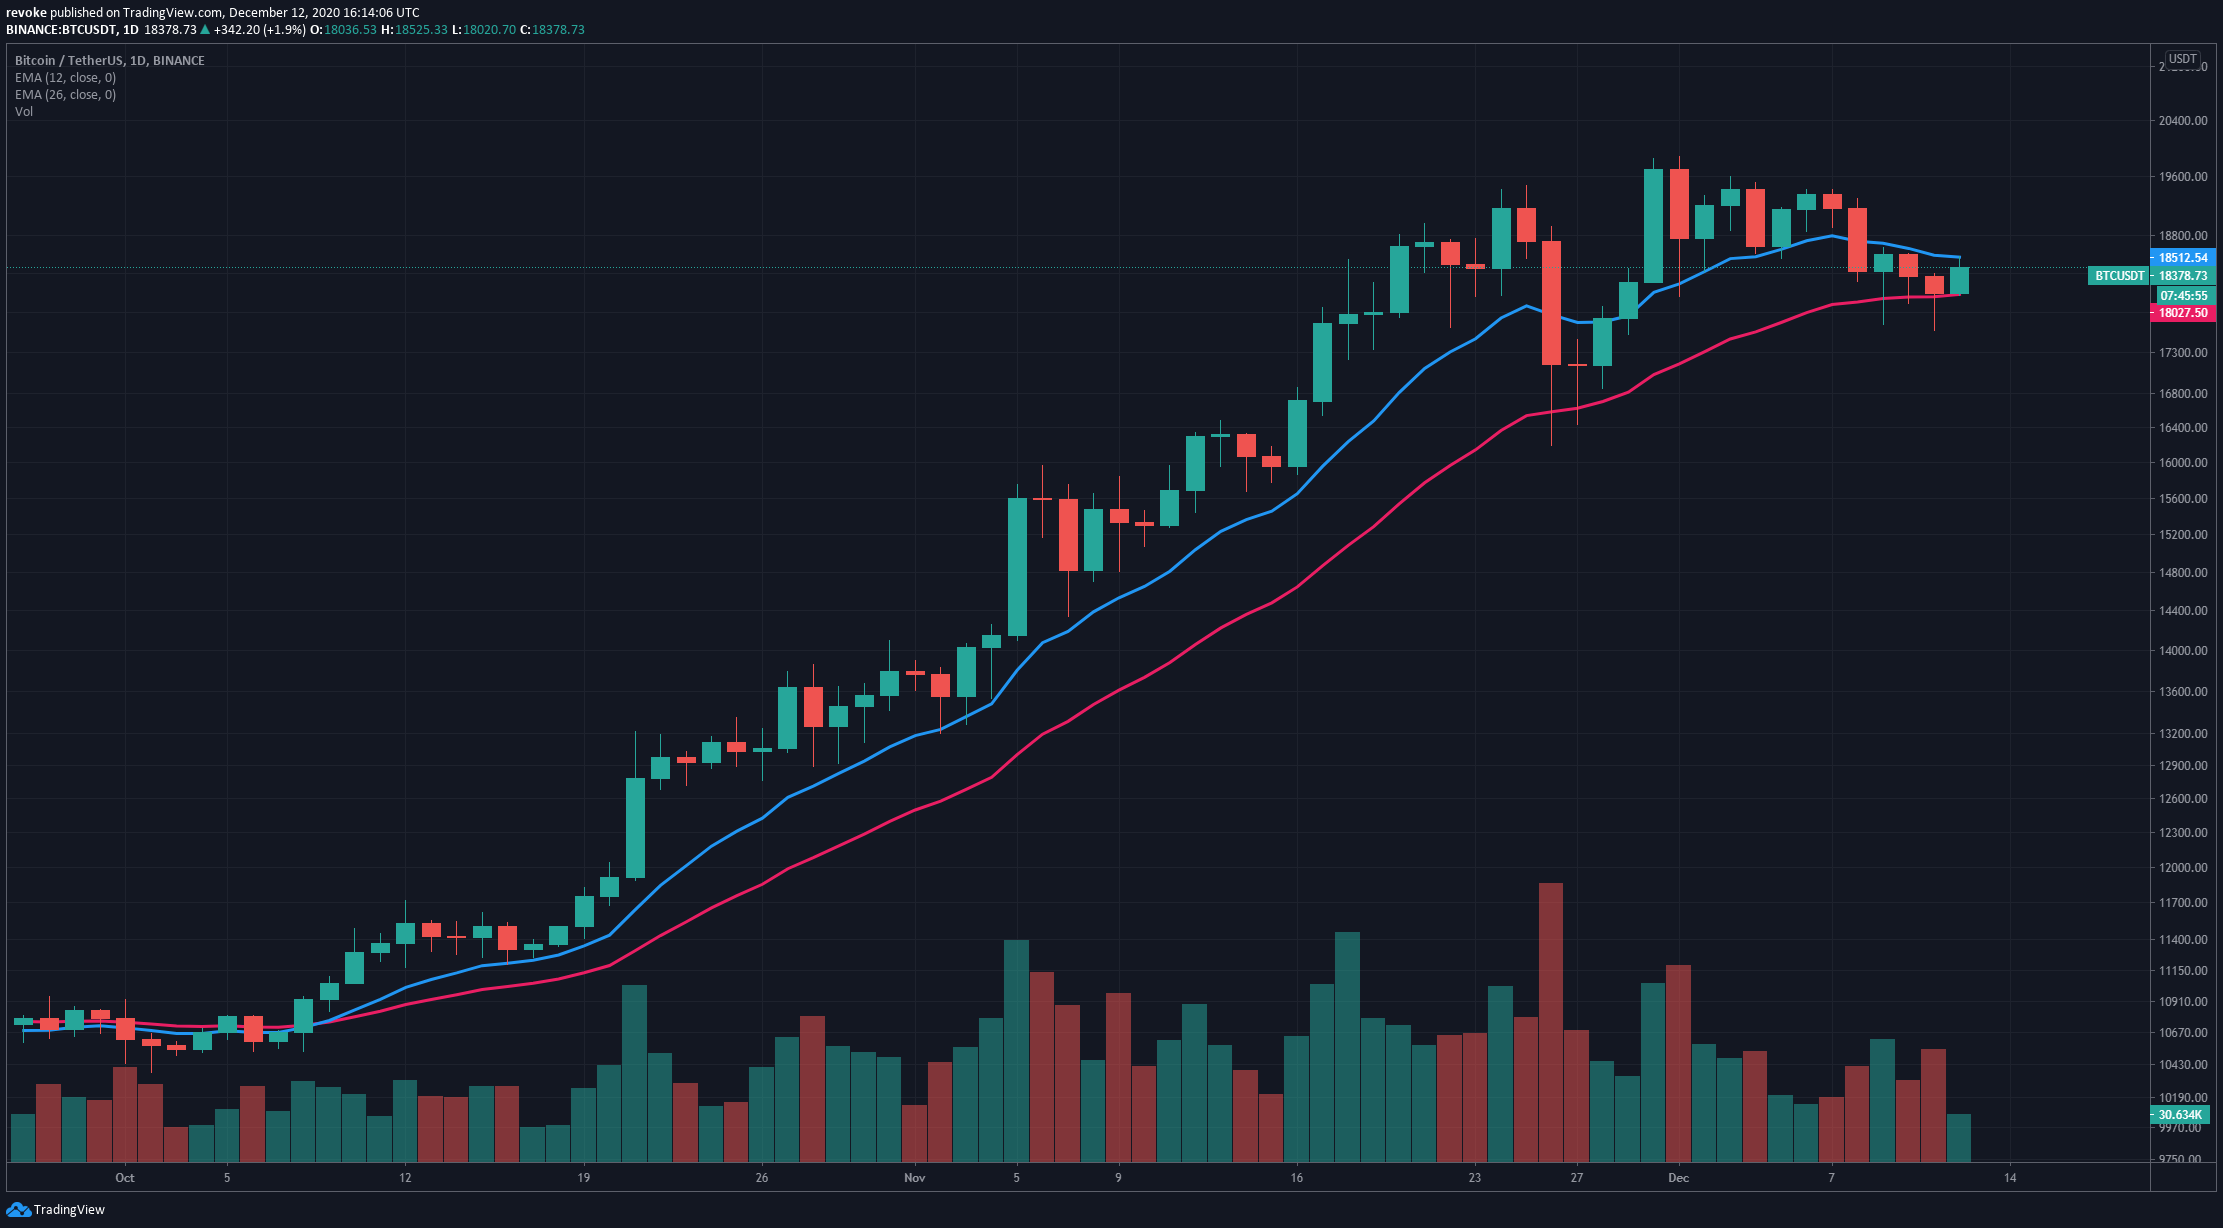 Bitcoin Price Prediction: BTC Aims For Recovery to $20,000 ...